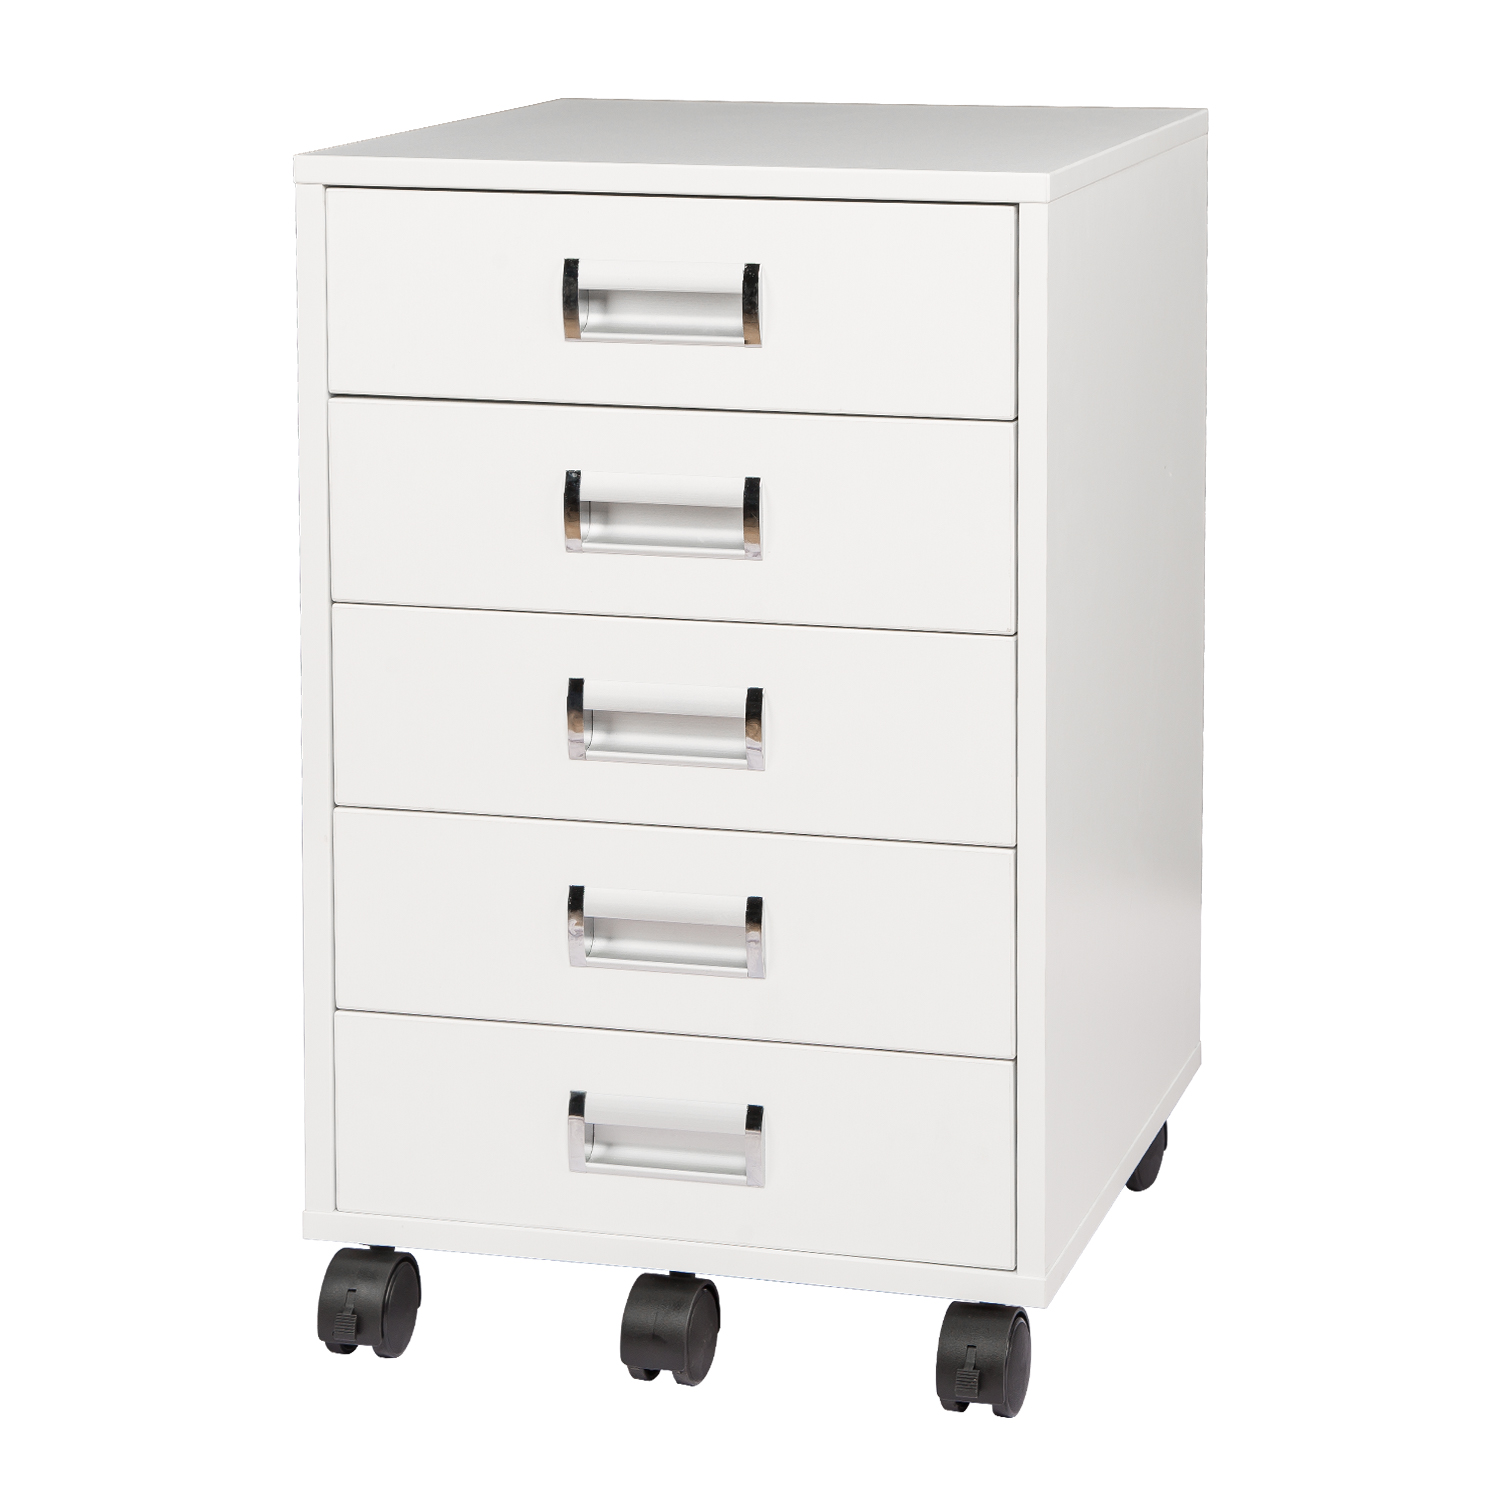 TOPSKY 5 Drawer Mobile Cabinet Fully Assembled Except Casters Built-in Handle S-15A